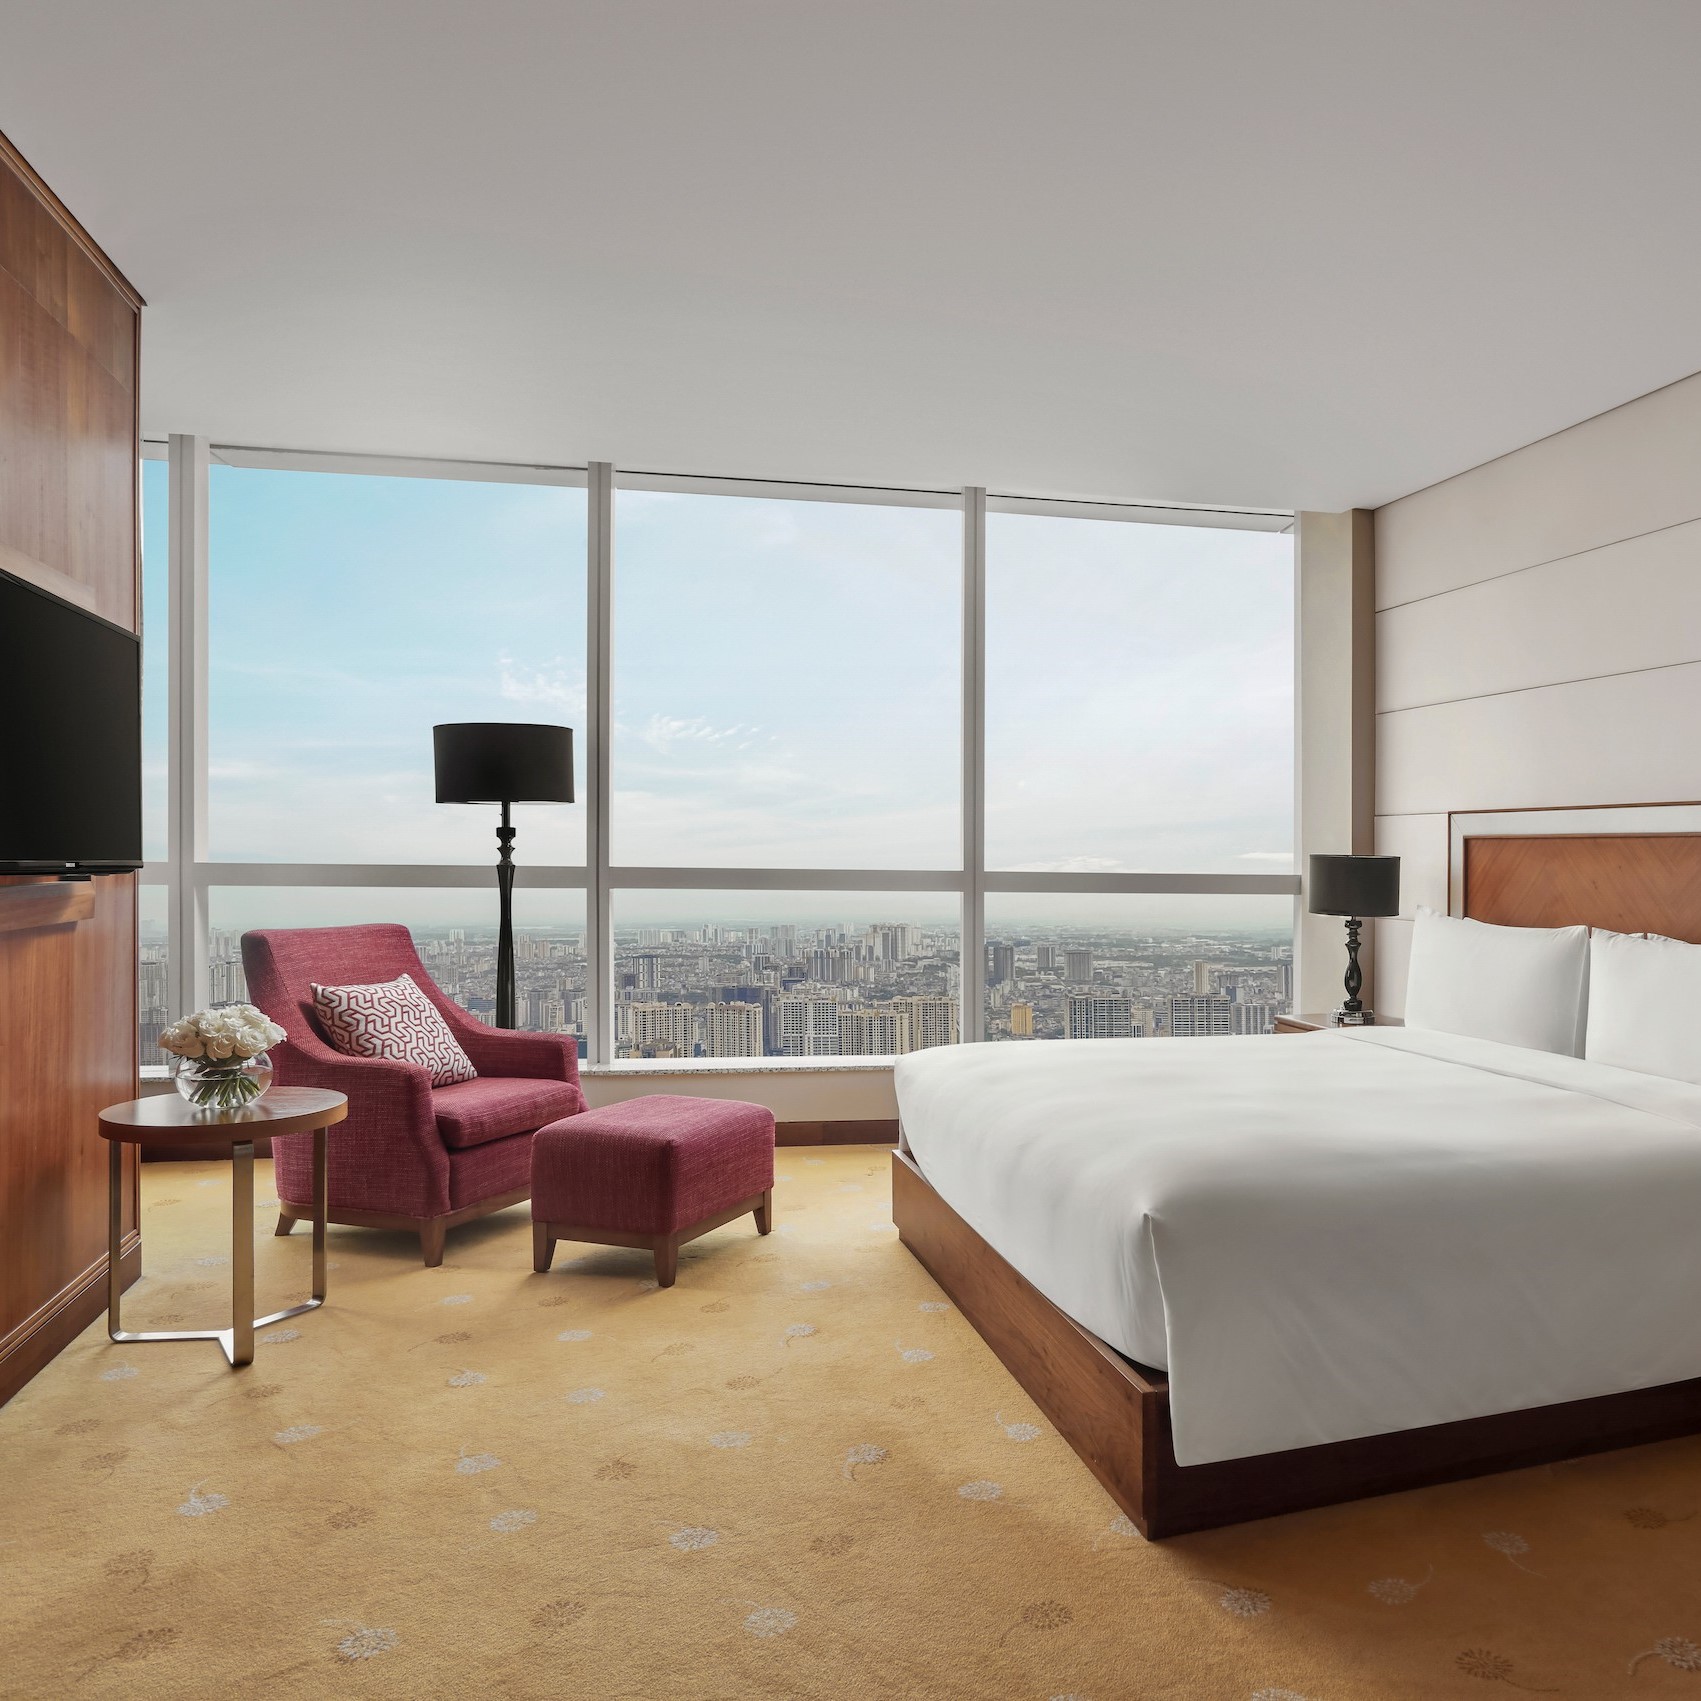 Luxurious accommodation and Club InterContinental benefits with the Junior Suite at InterContinental Hanoi Landmark72